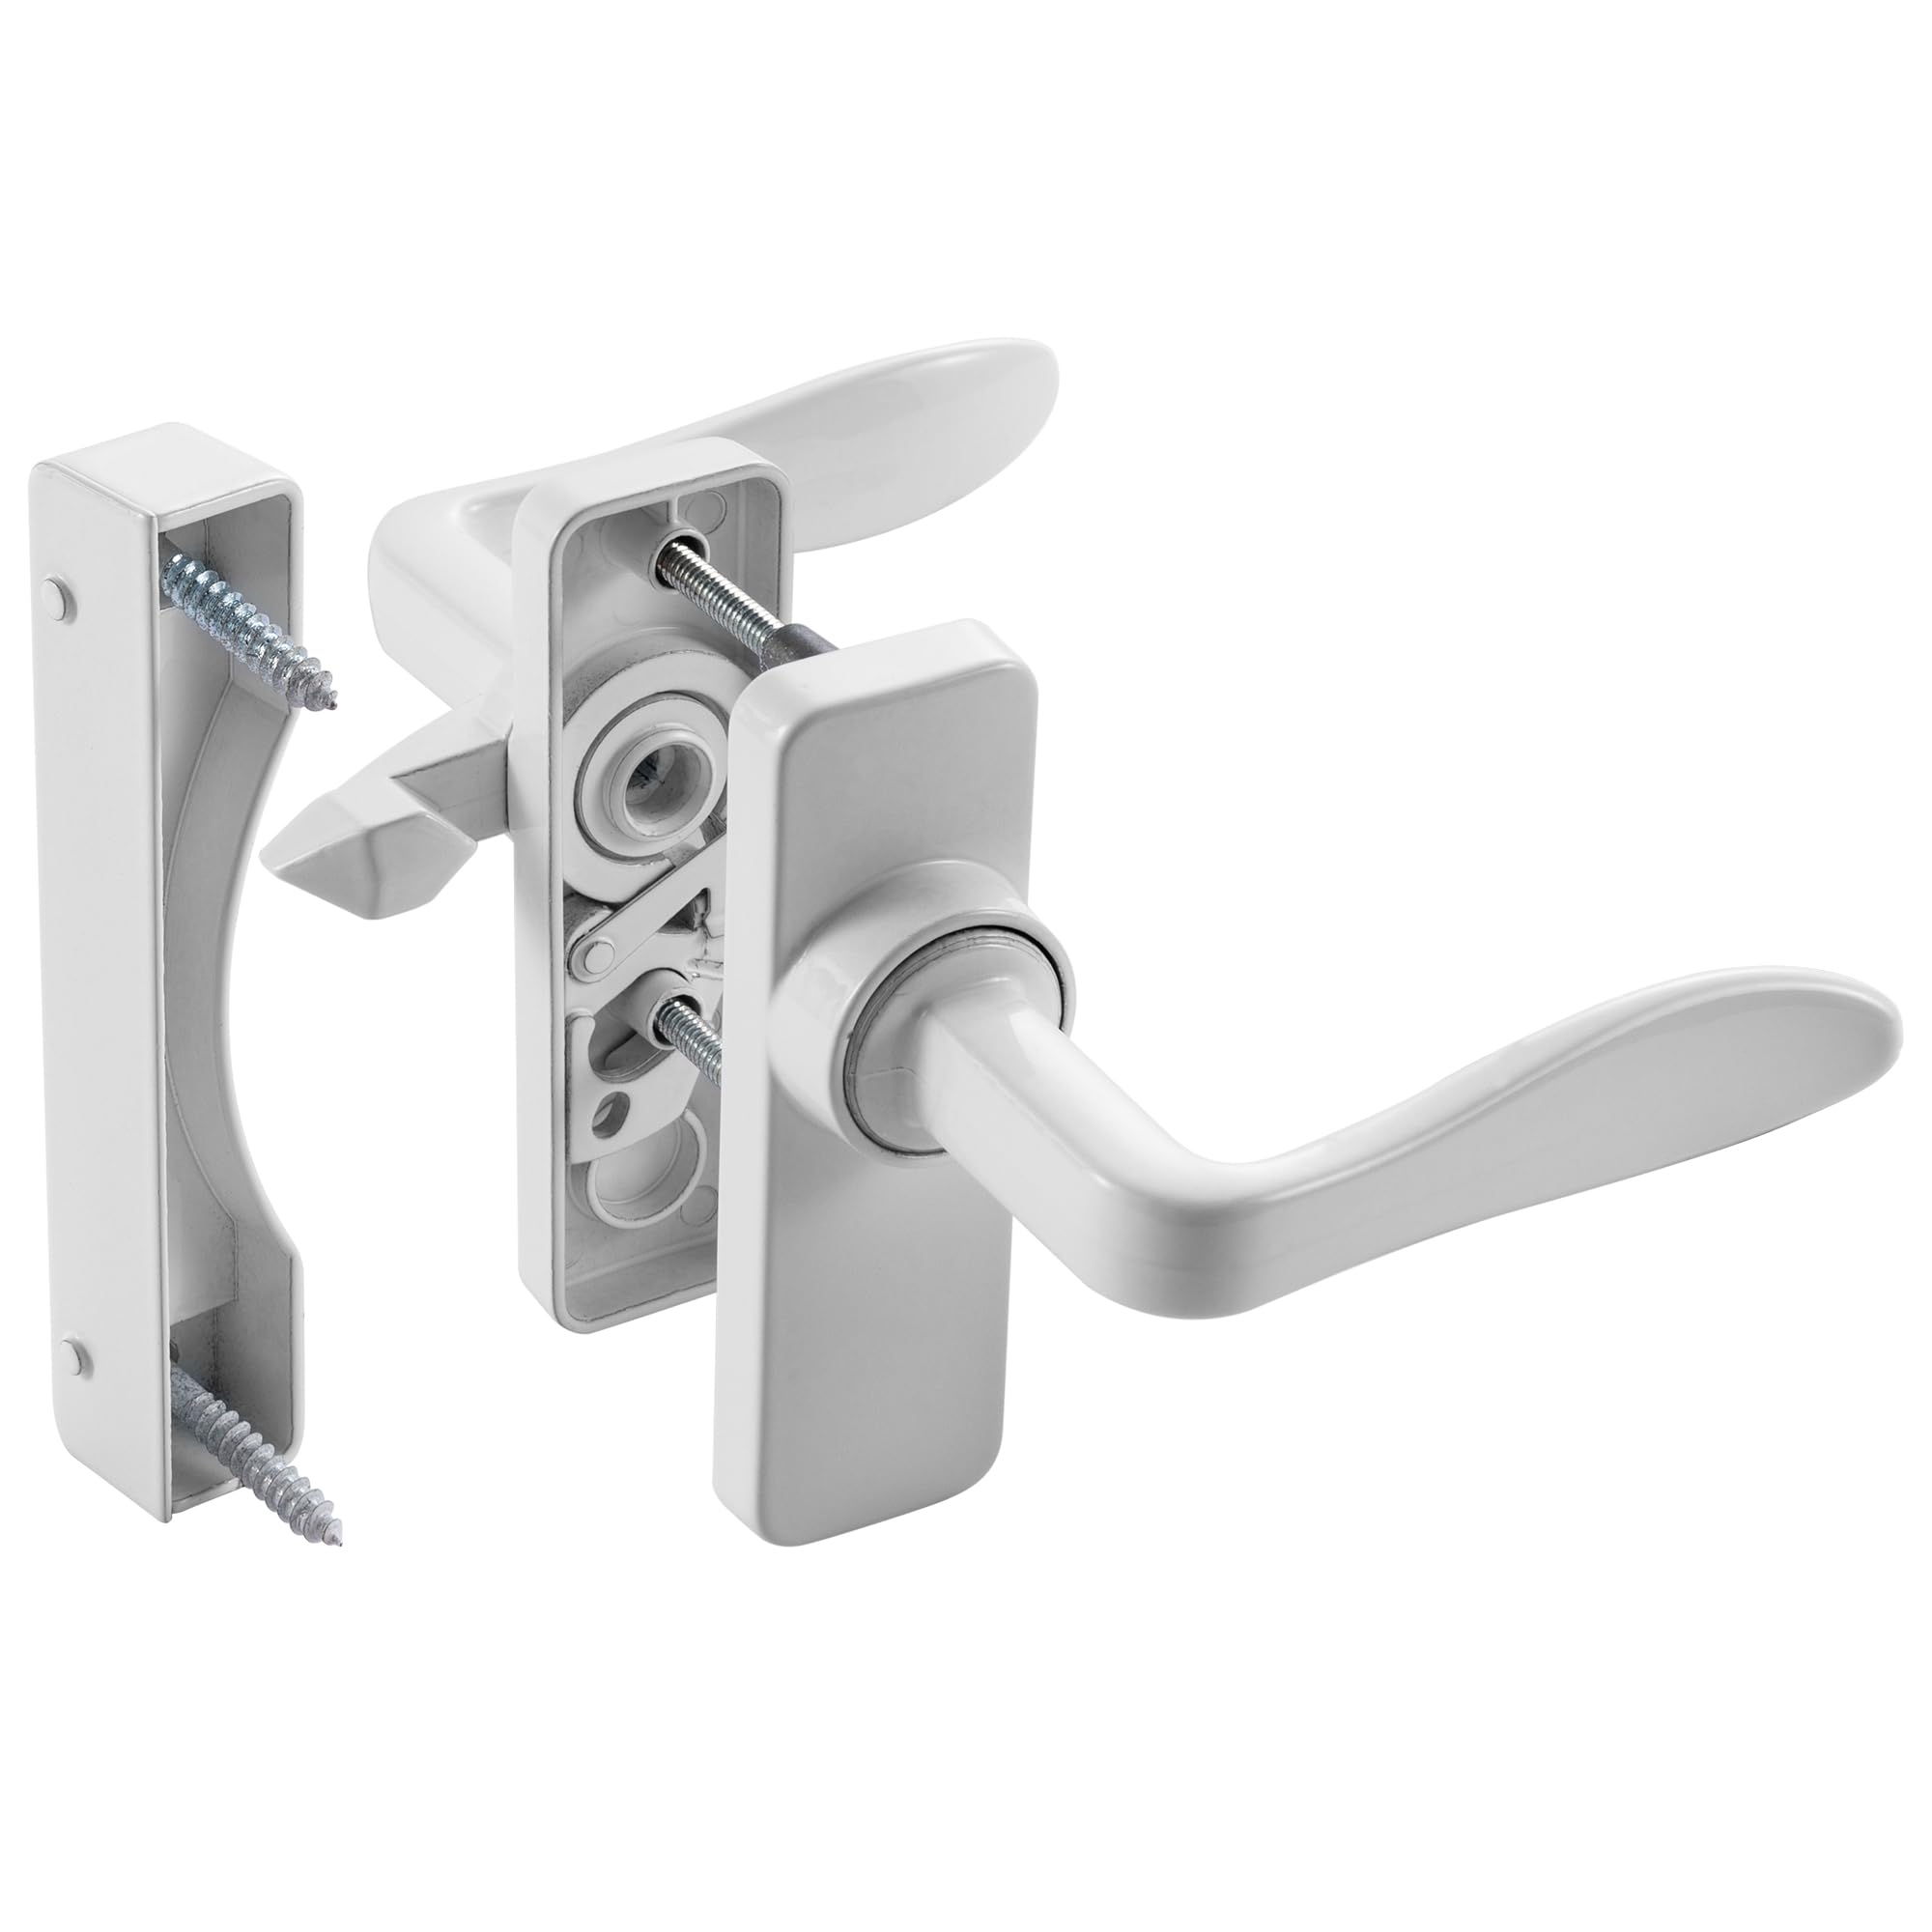 Ideal Security in-Swinging Handle Set for Storm and Screen Doors with Locking Inside Latch, Surface Mount, Swing in Screen Door Handle, White